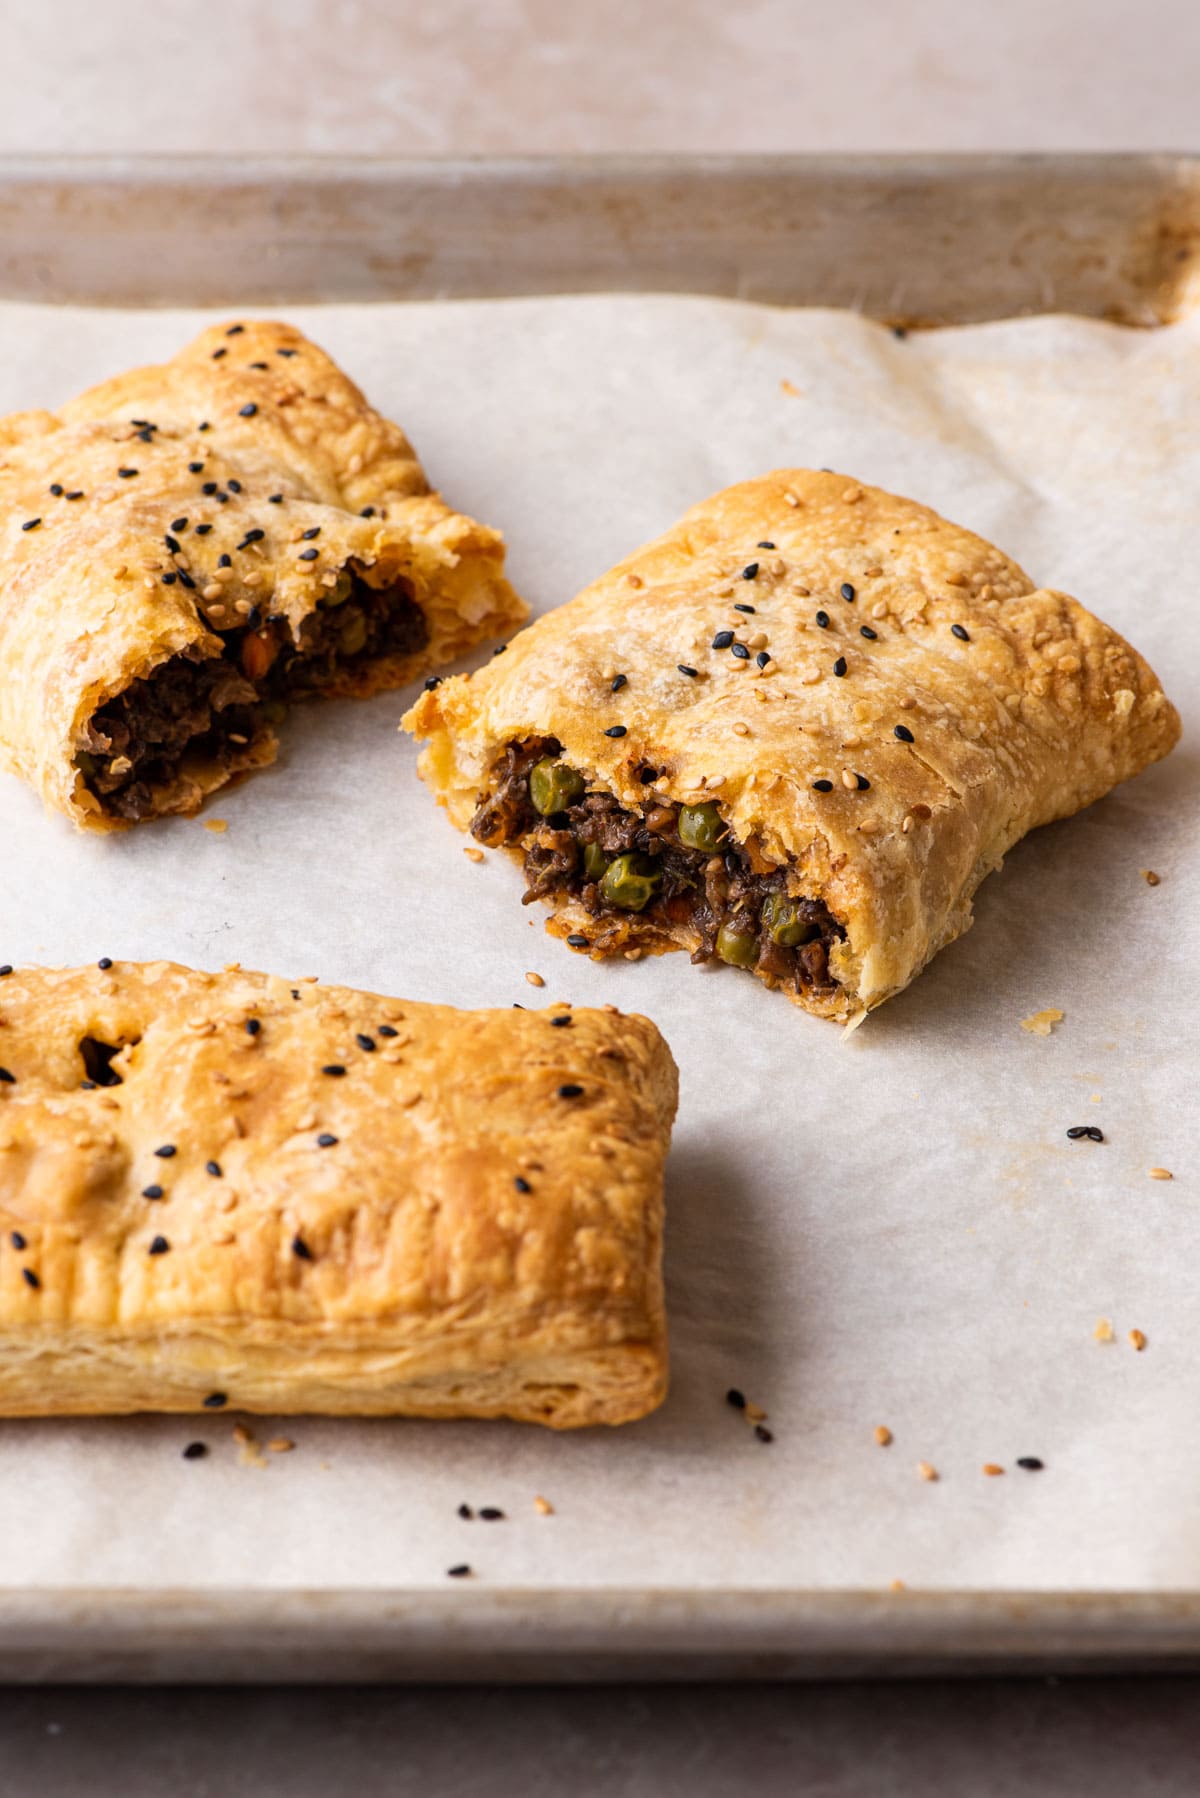 Vegan savory hand pies with mushroom filling and store-bought puff pastry.